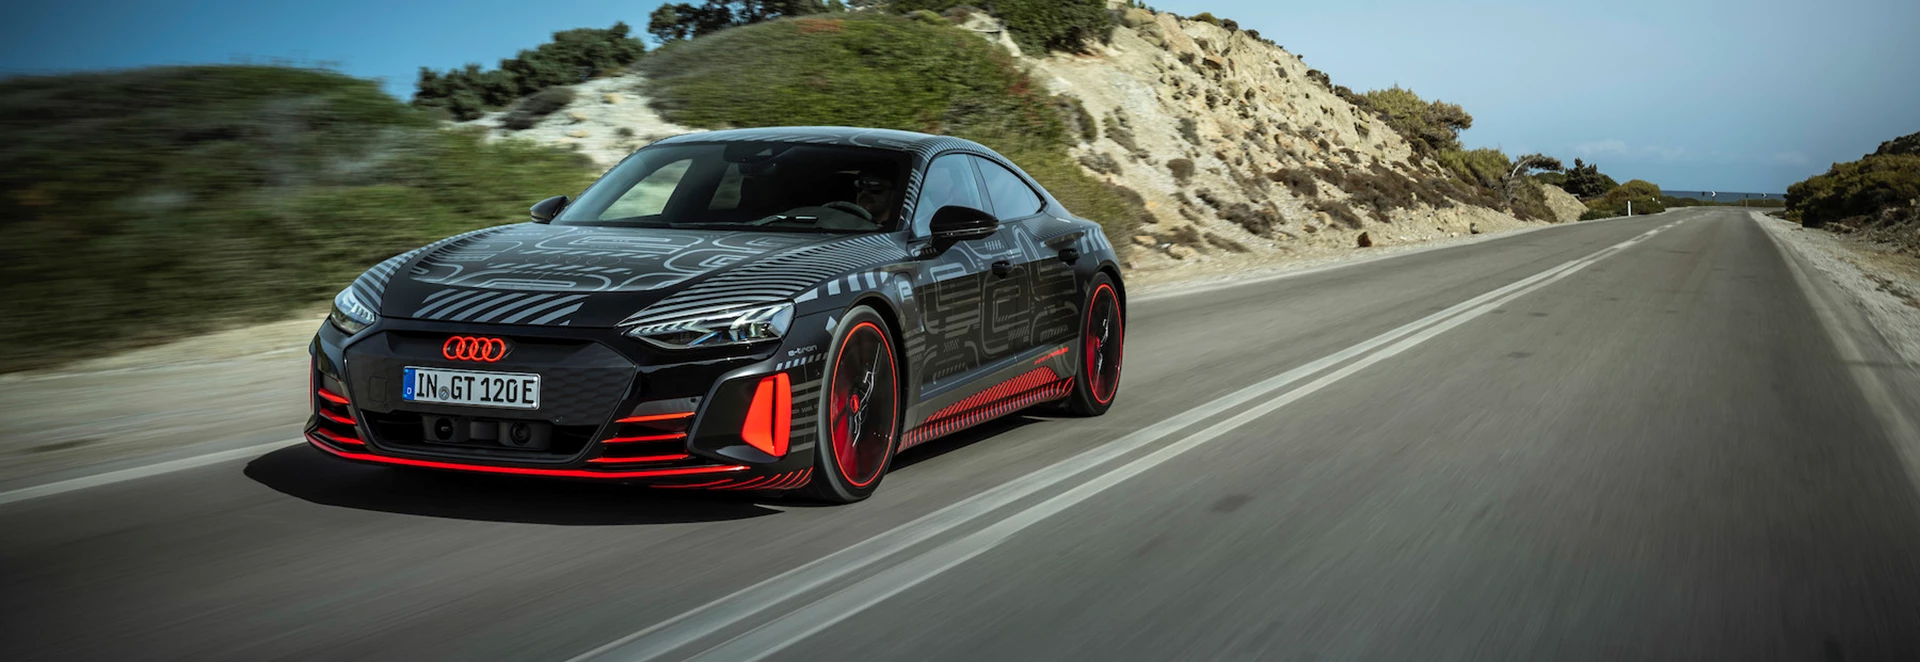 2021 Audi e-tron GT: 5 things you need to know 